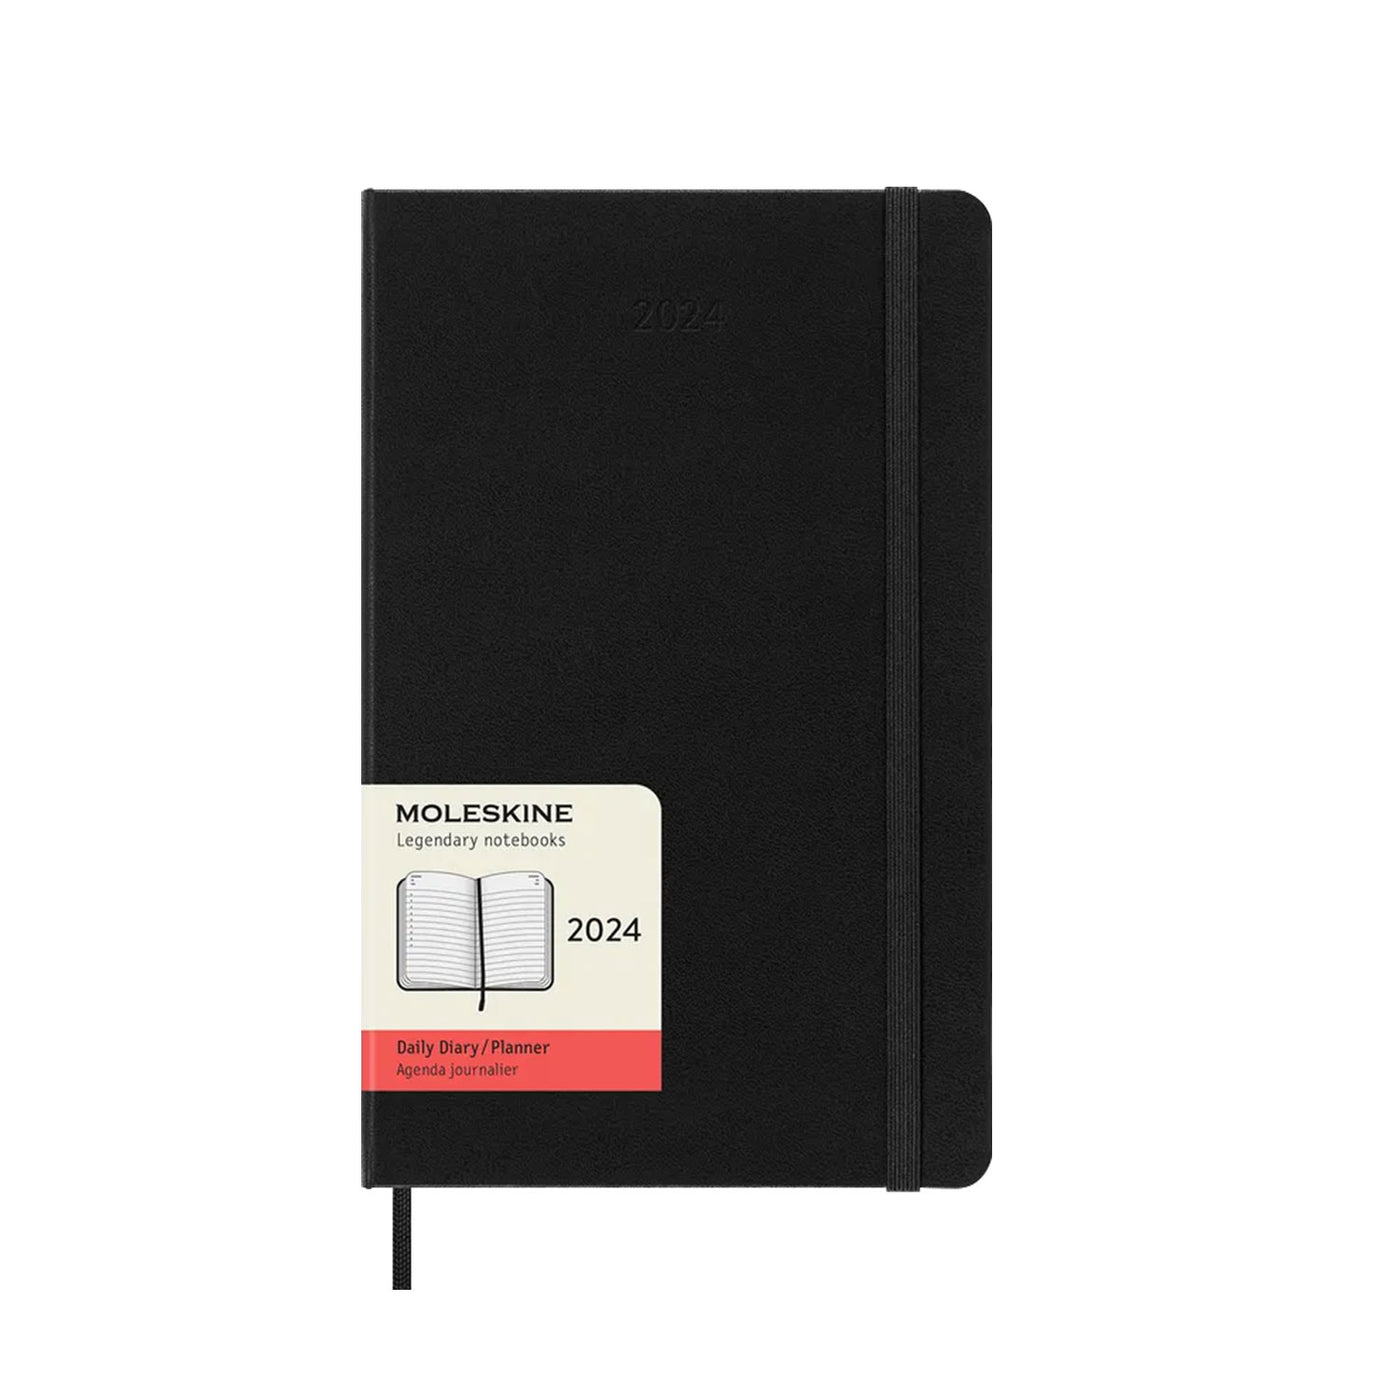 Moleskine 2024 Classic Large Hard Cover Daily Planner - Black 1